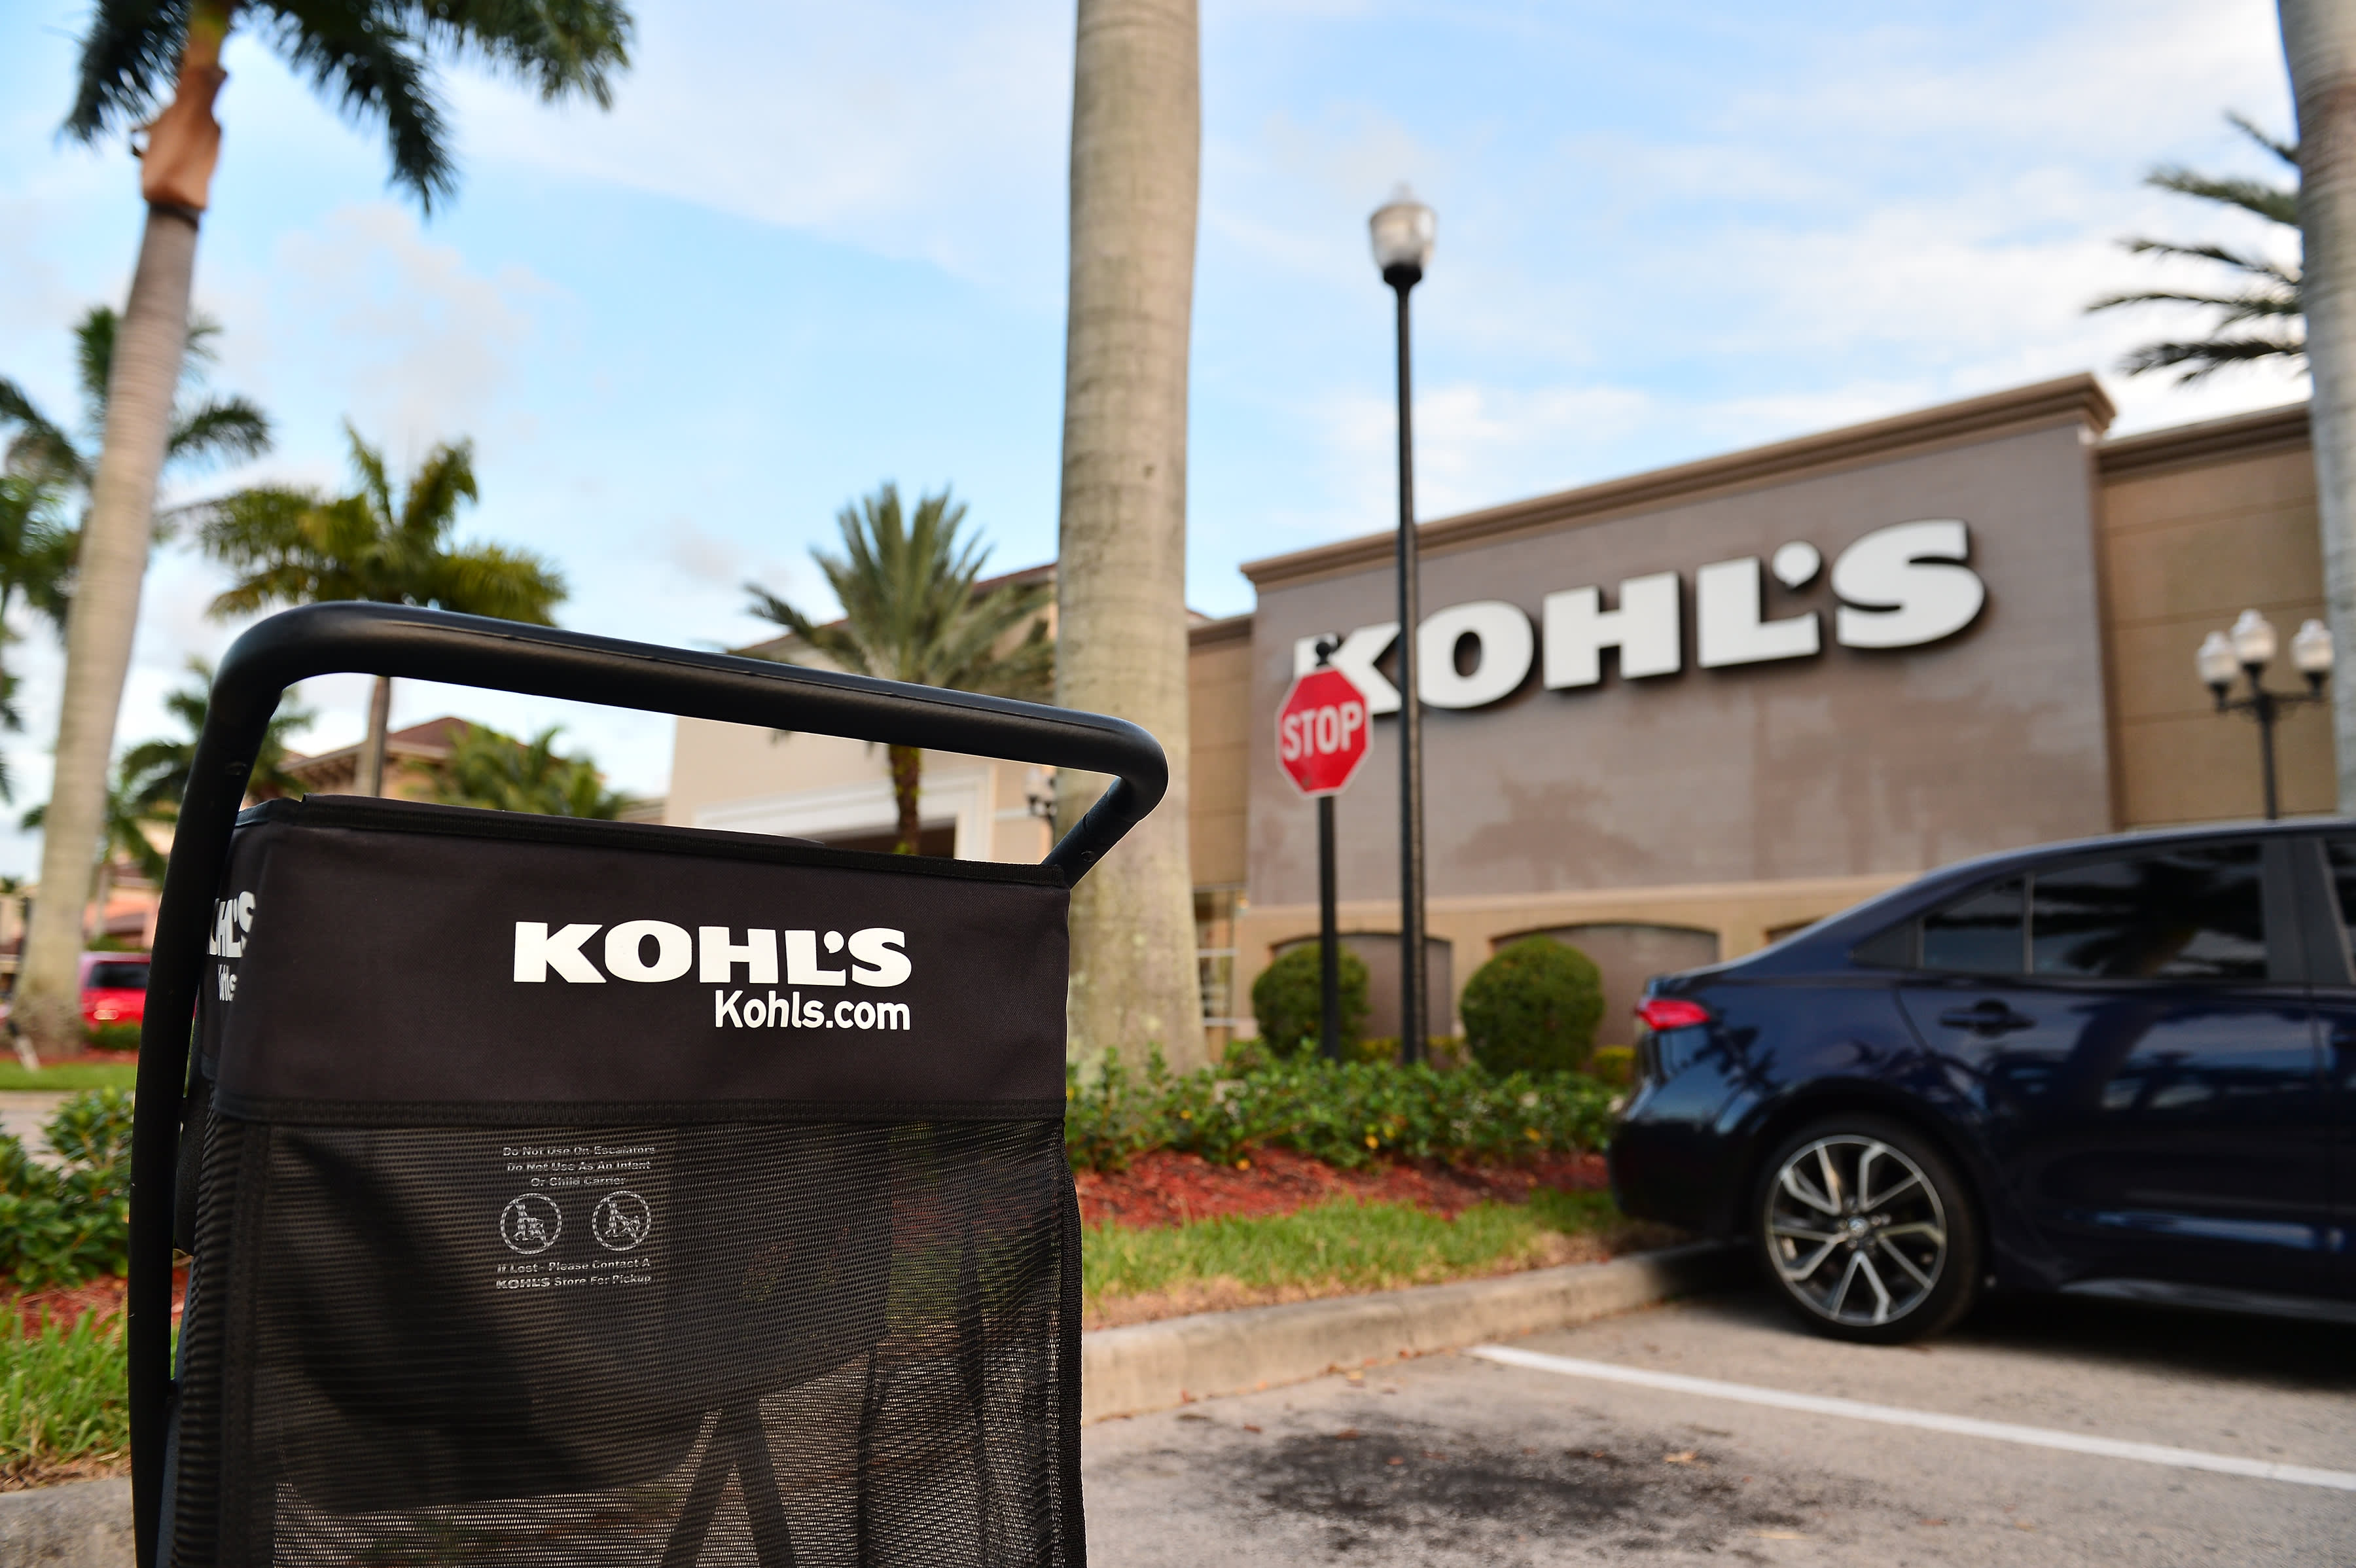 Kohl’s sees its quarterly holiday revenue fall by 10%, but sales strengthen